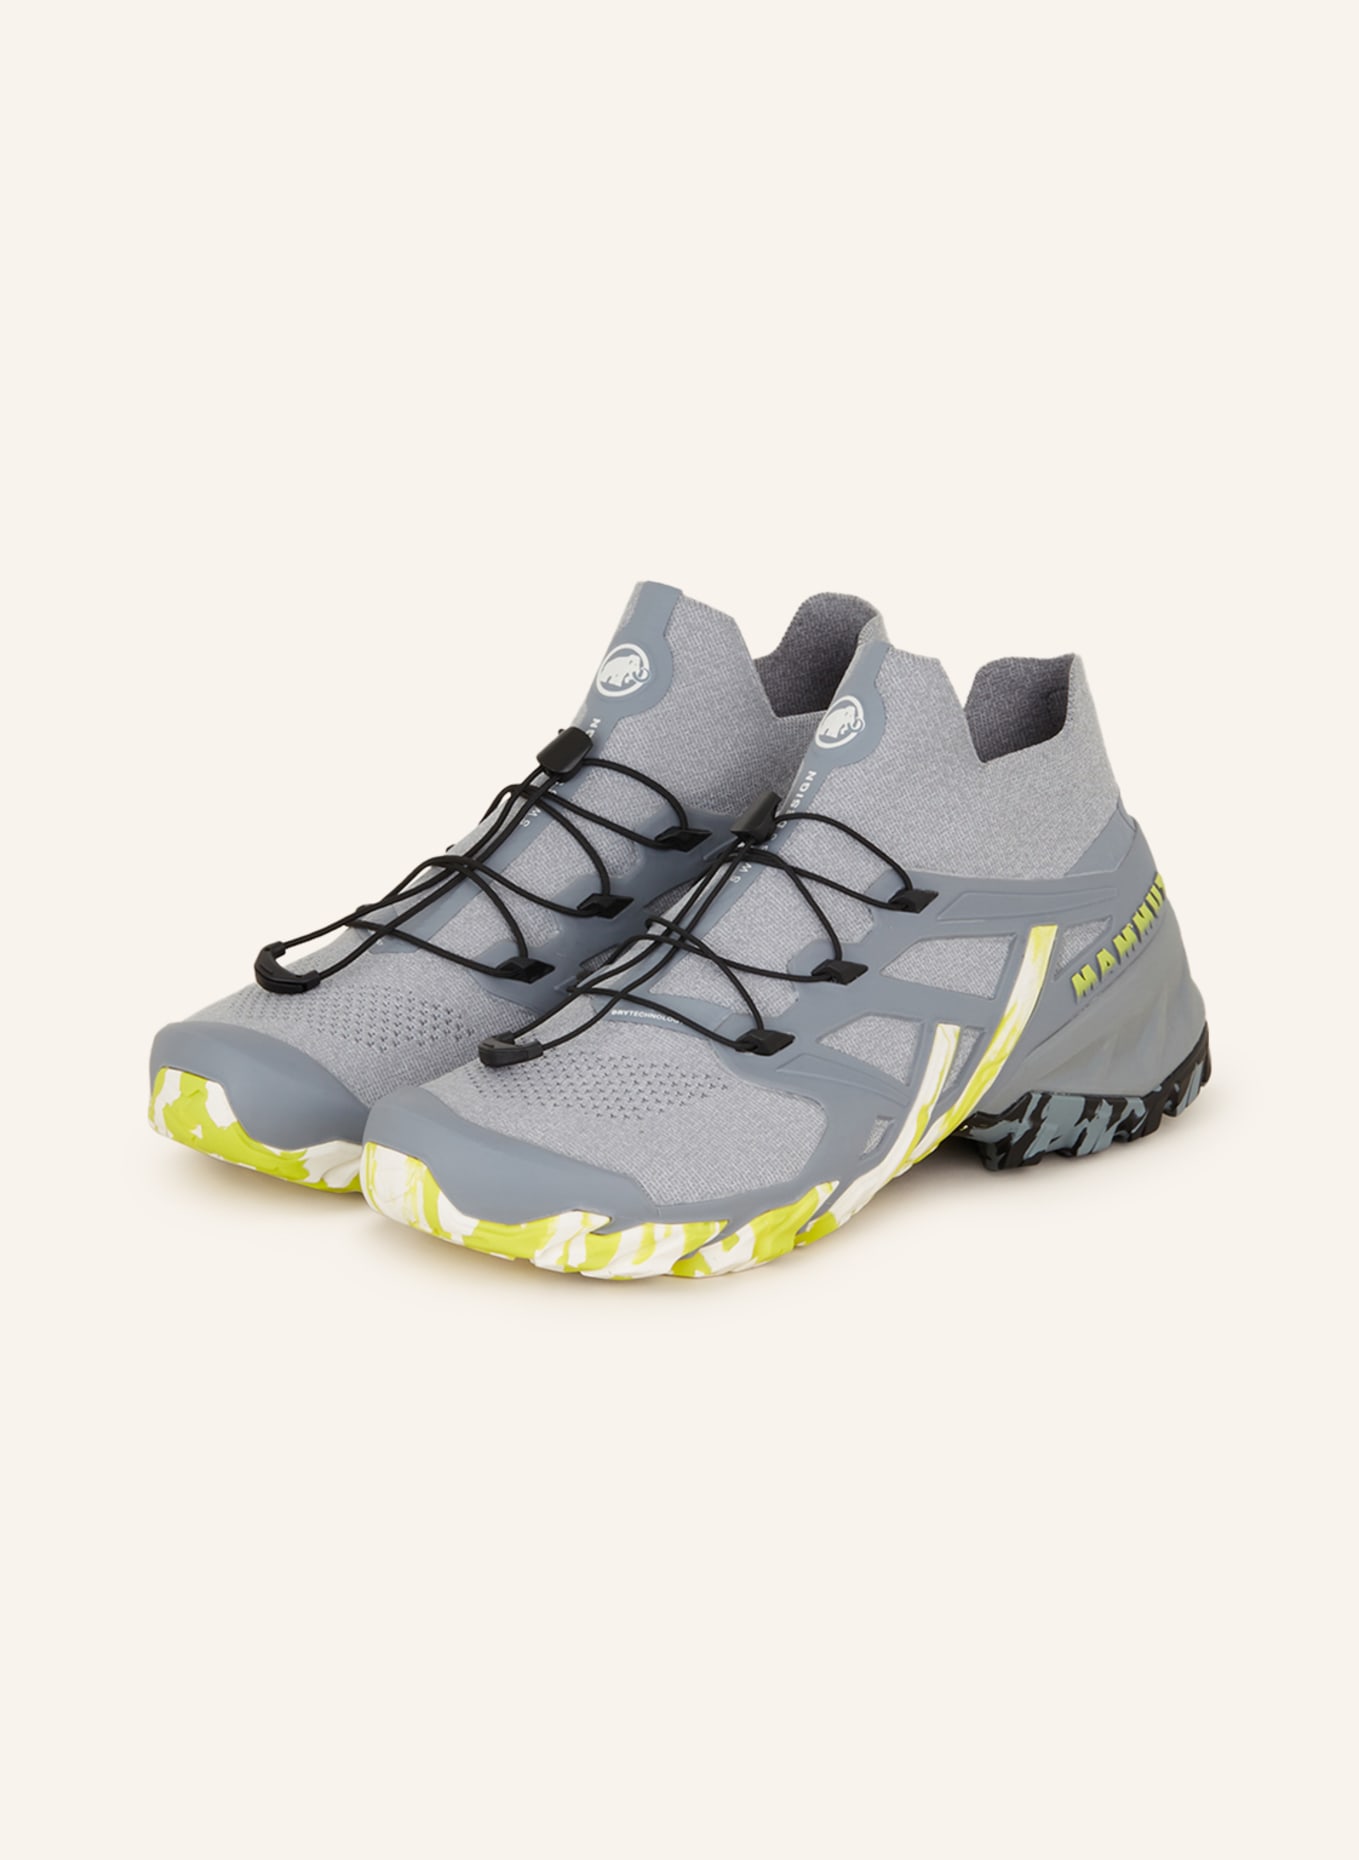 MAMMUT Trekking shoes AEGILITY PRO MID DT, Color: LIGHT GRAY/ YELLOW/ GRAY (Image 1)